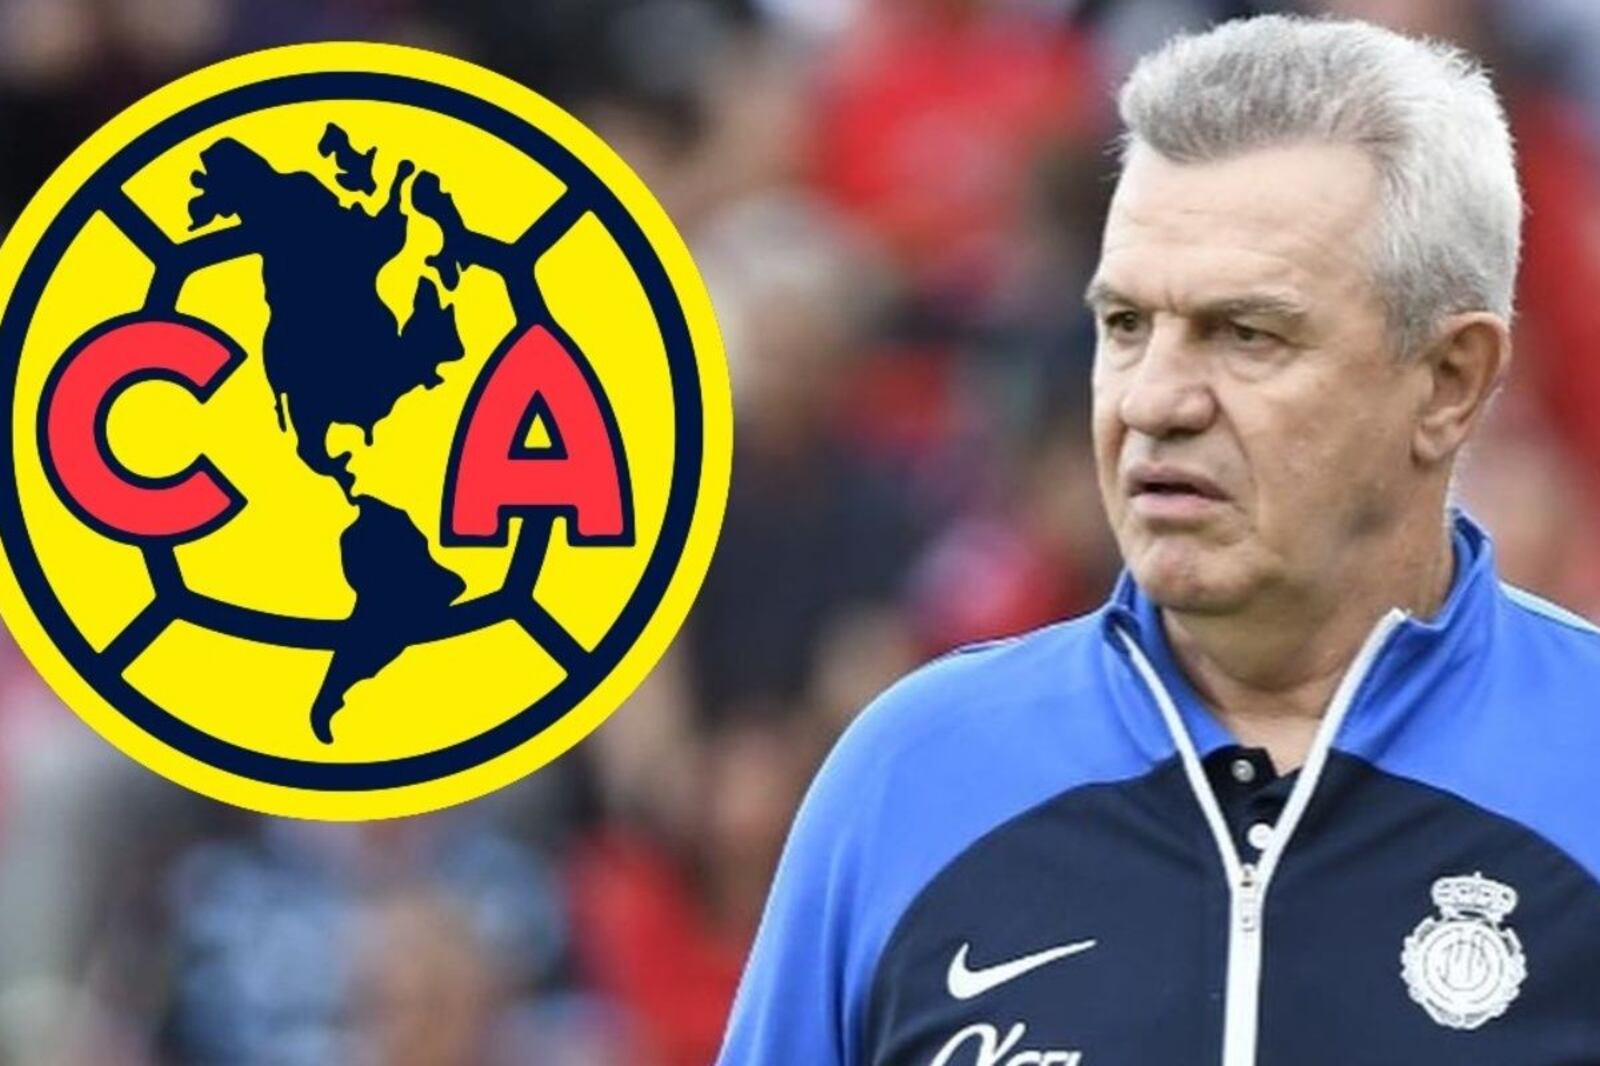 The millionaire salary that Club América offers Javier Aguirre to leave Spain